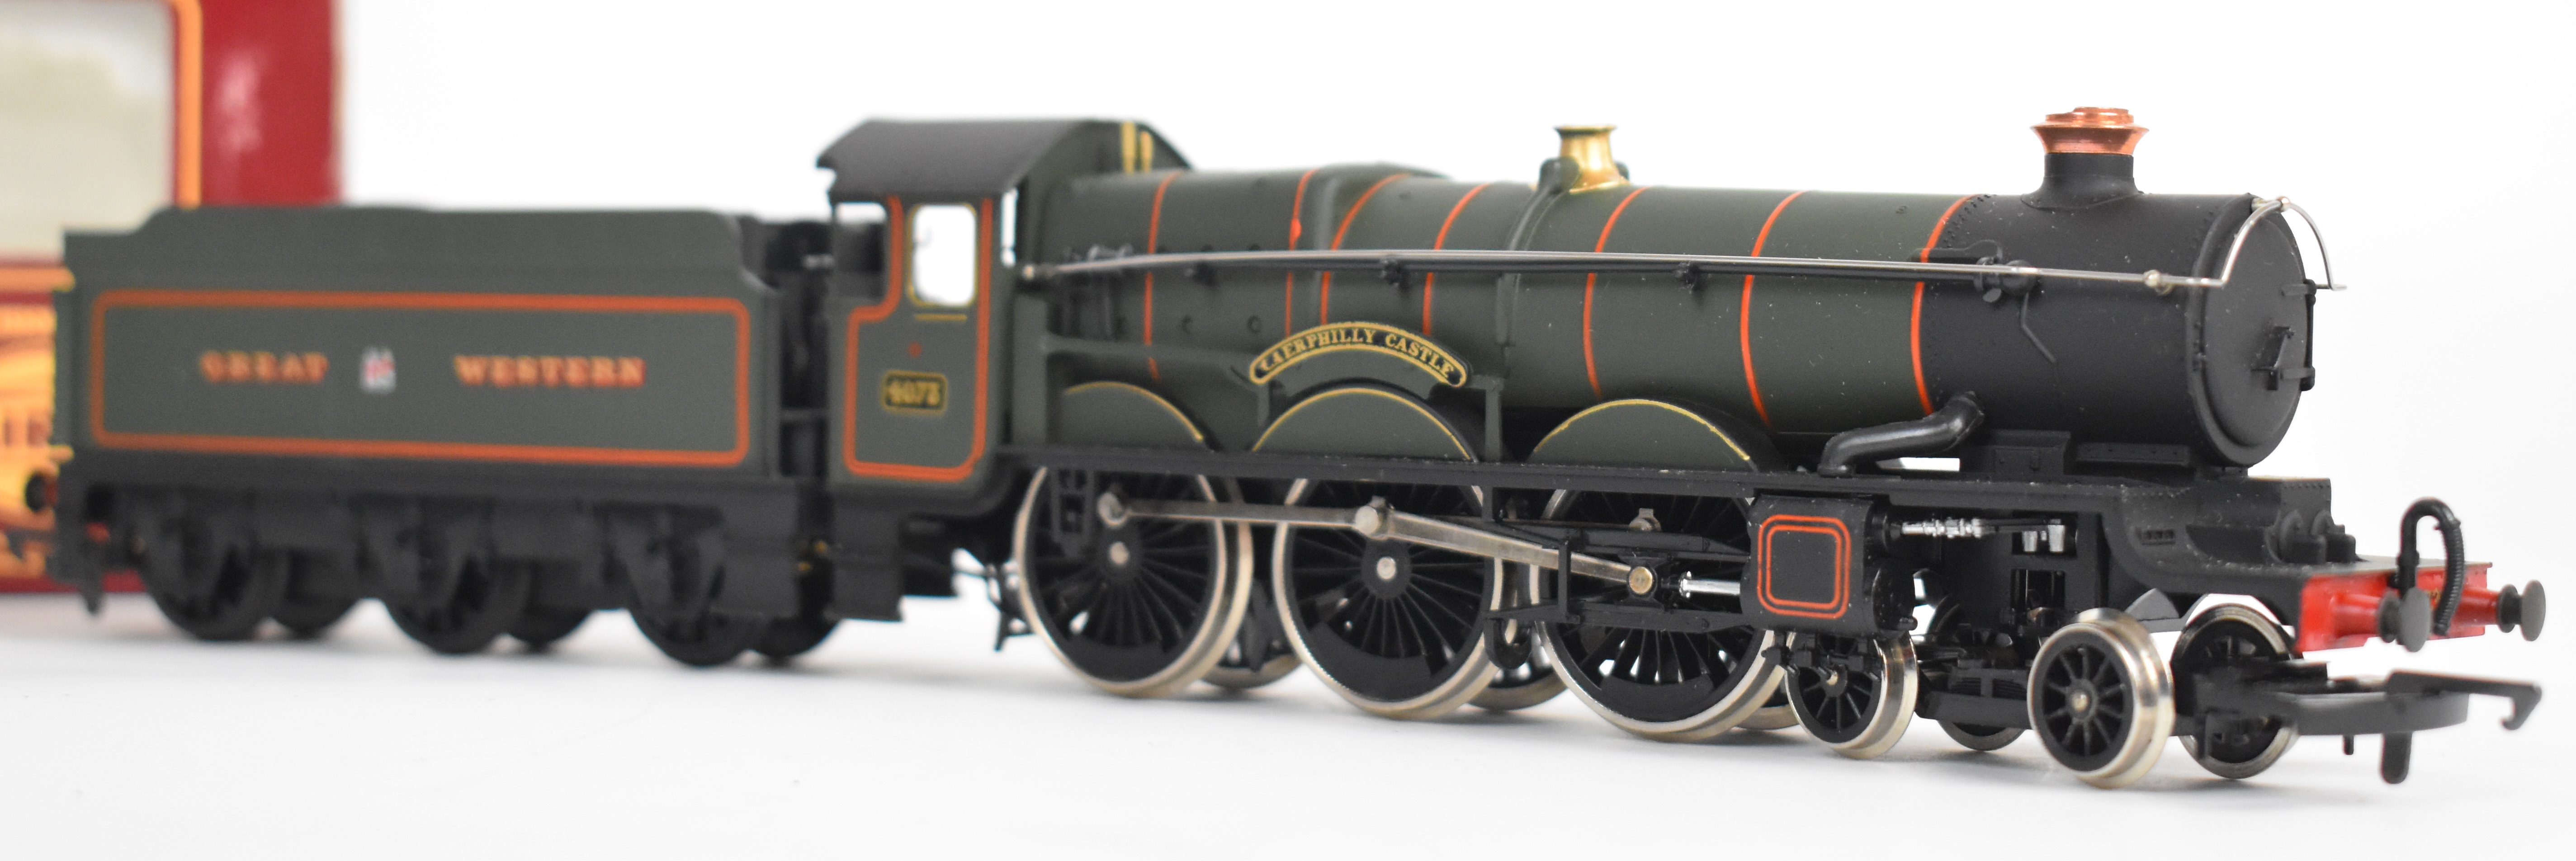 Five 00 gauge model railway locomotives by Airfix, Lima and similar to include GWR 0-4-2 1400 Tank - Image 6 of 7